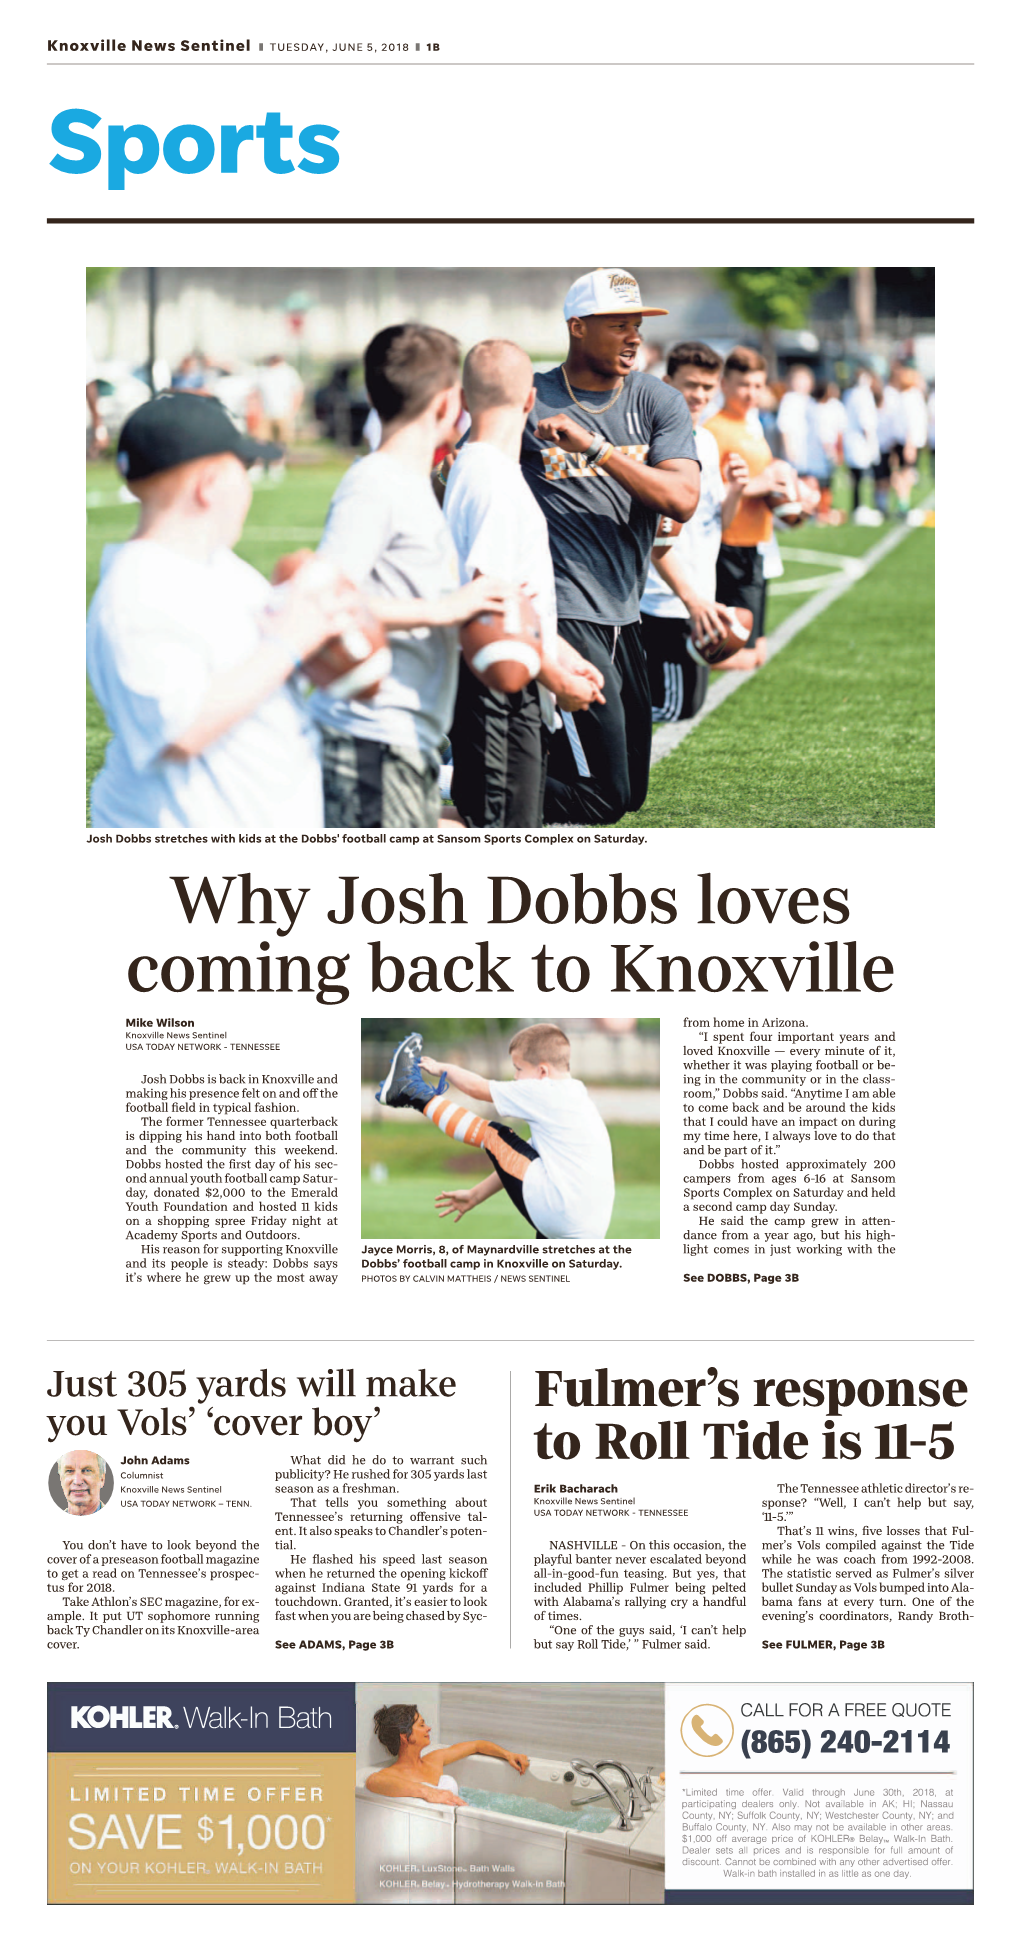 Why Josh Dobbs Loves Coming Back to Knoxville Mike Wilson from Home in Arizona